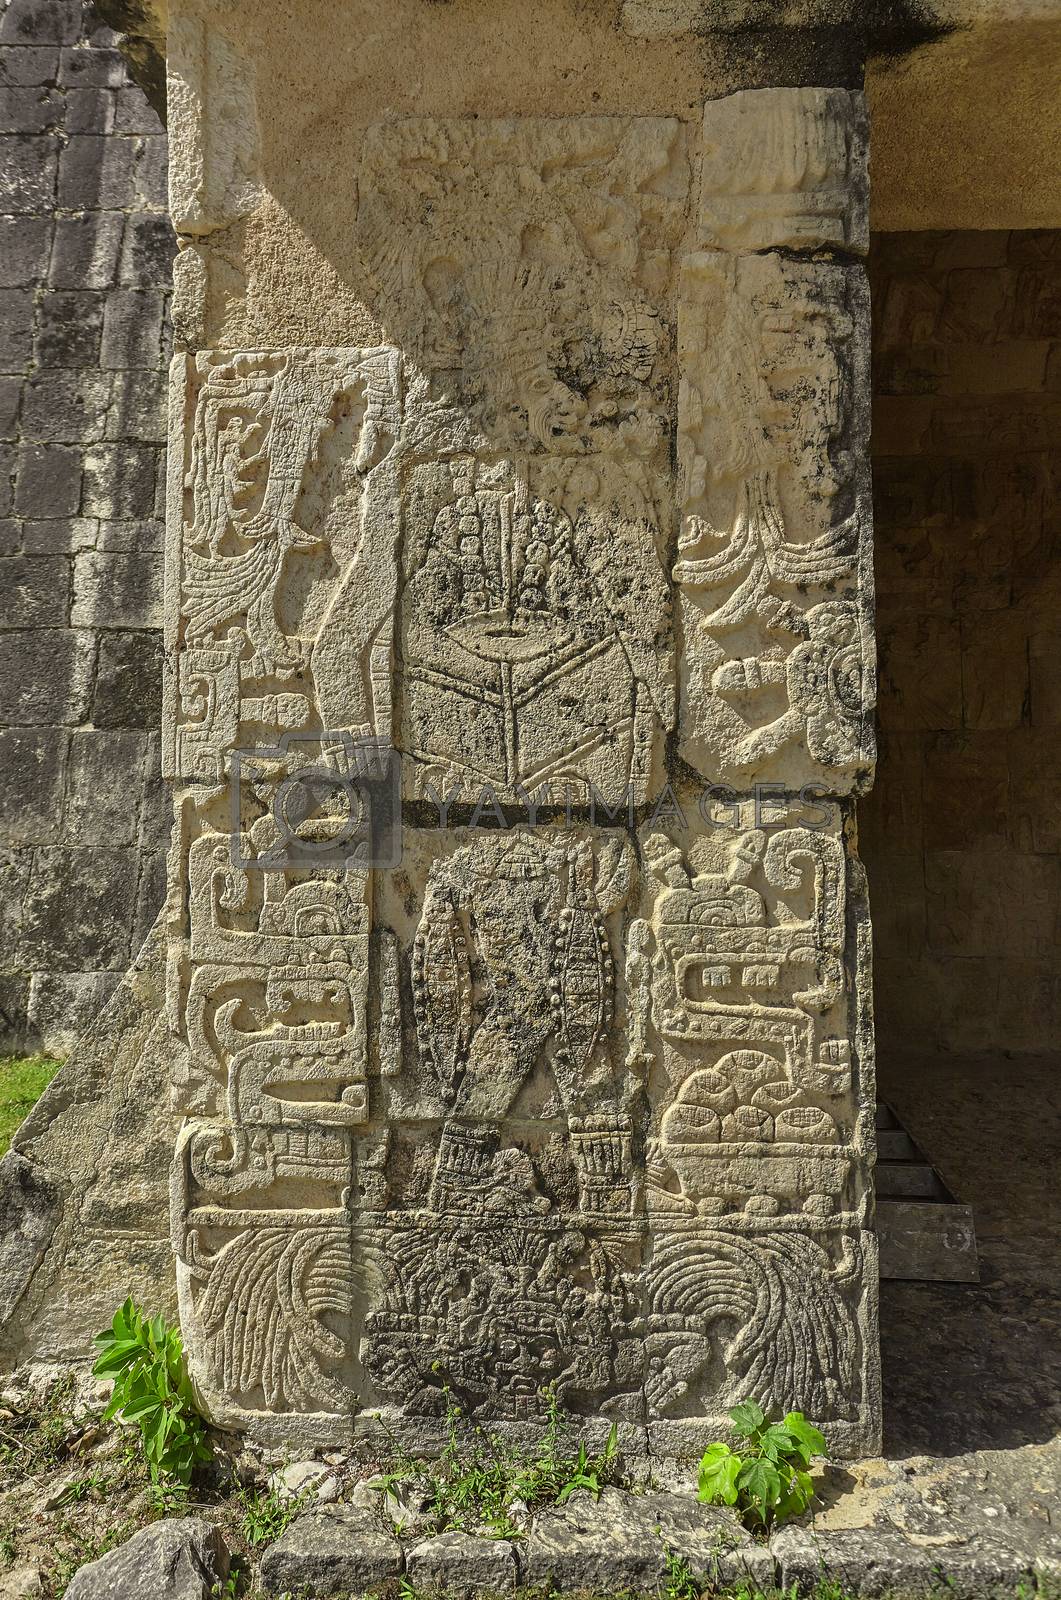 Royalty free image of Stele with Mayan inscriptions in Chichen Itza #2 by pippocarlot